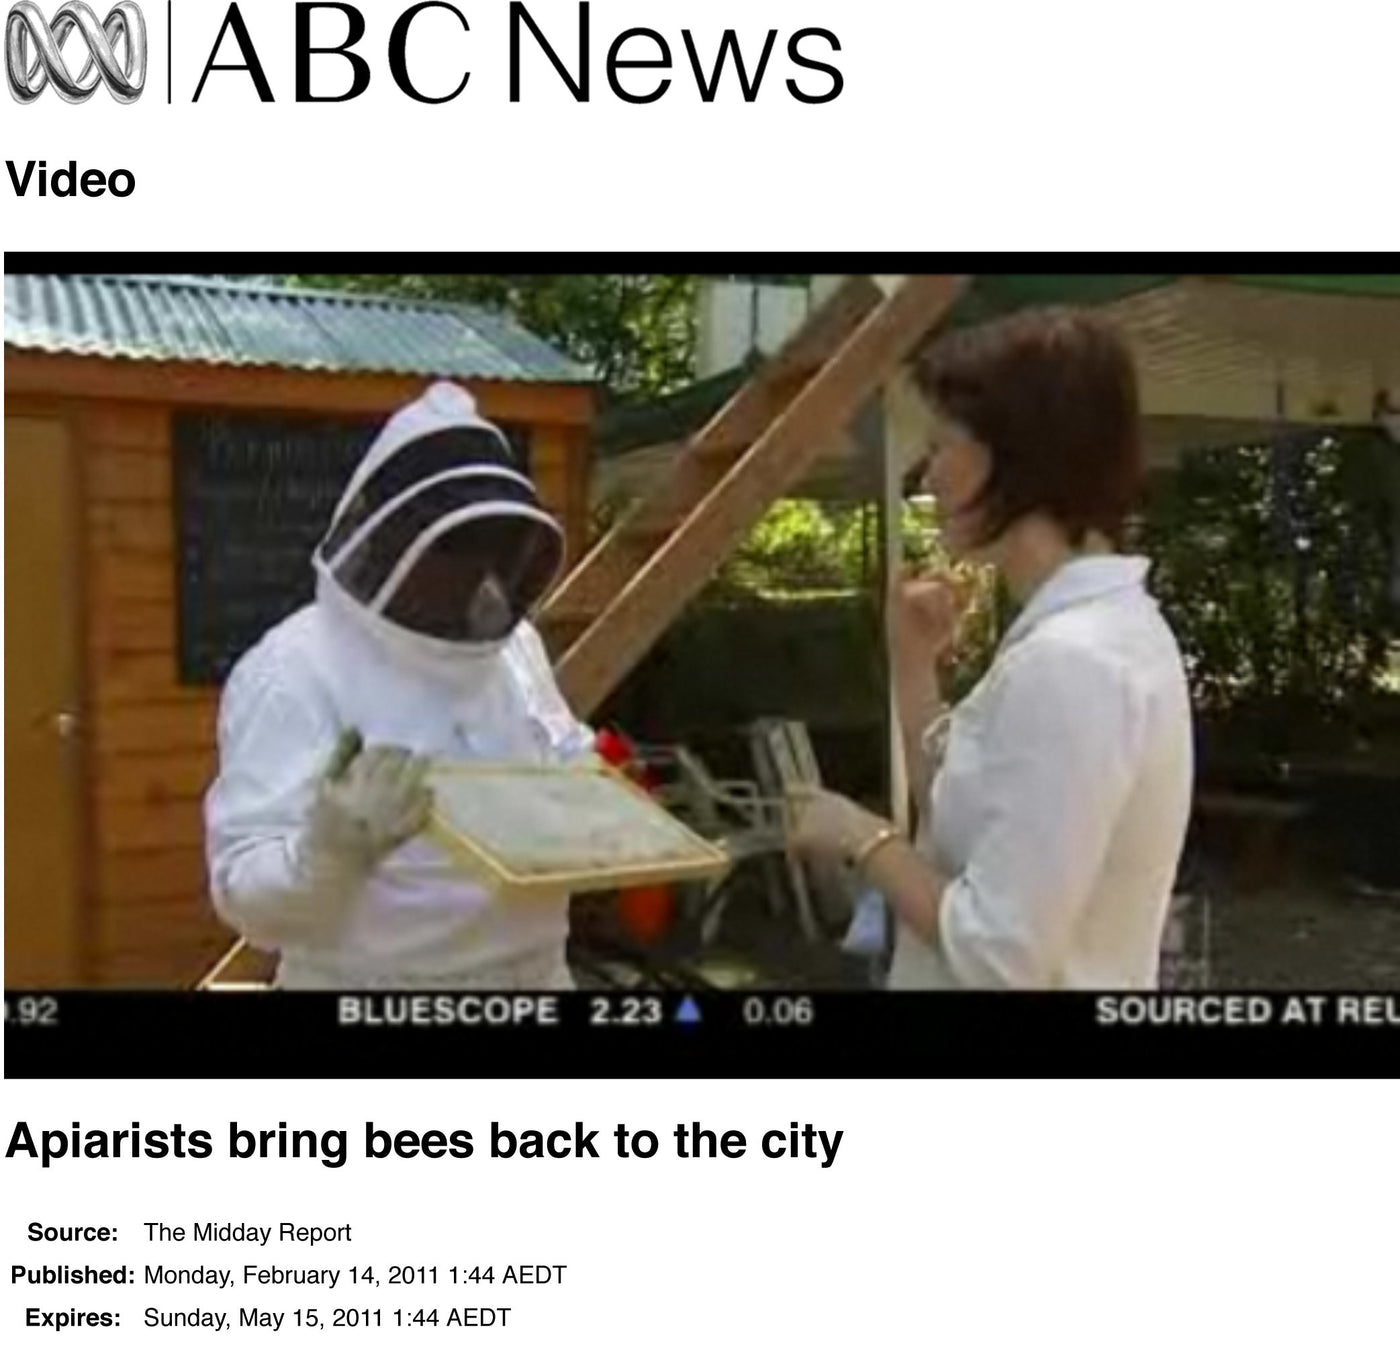 ABC News story - "Apiarists bring bees back to the city"